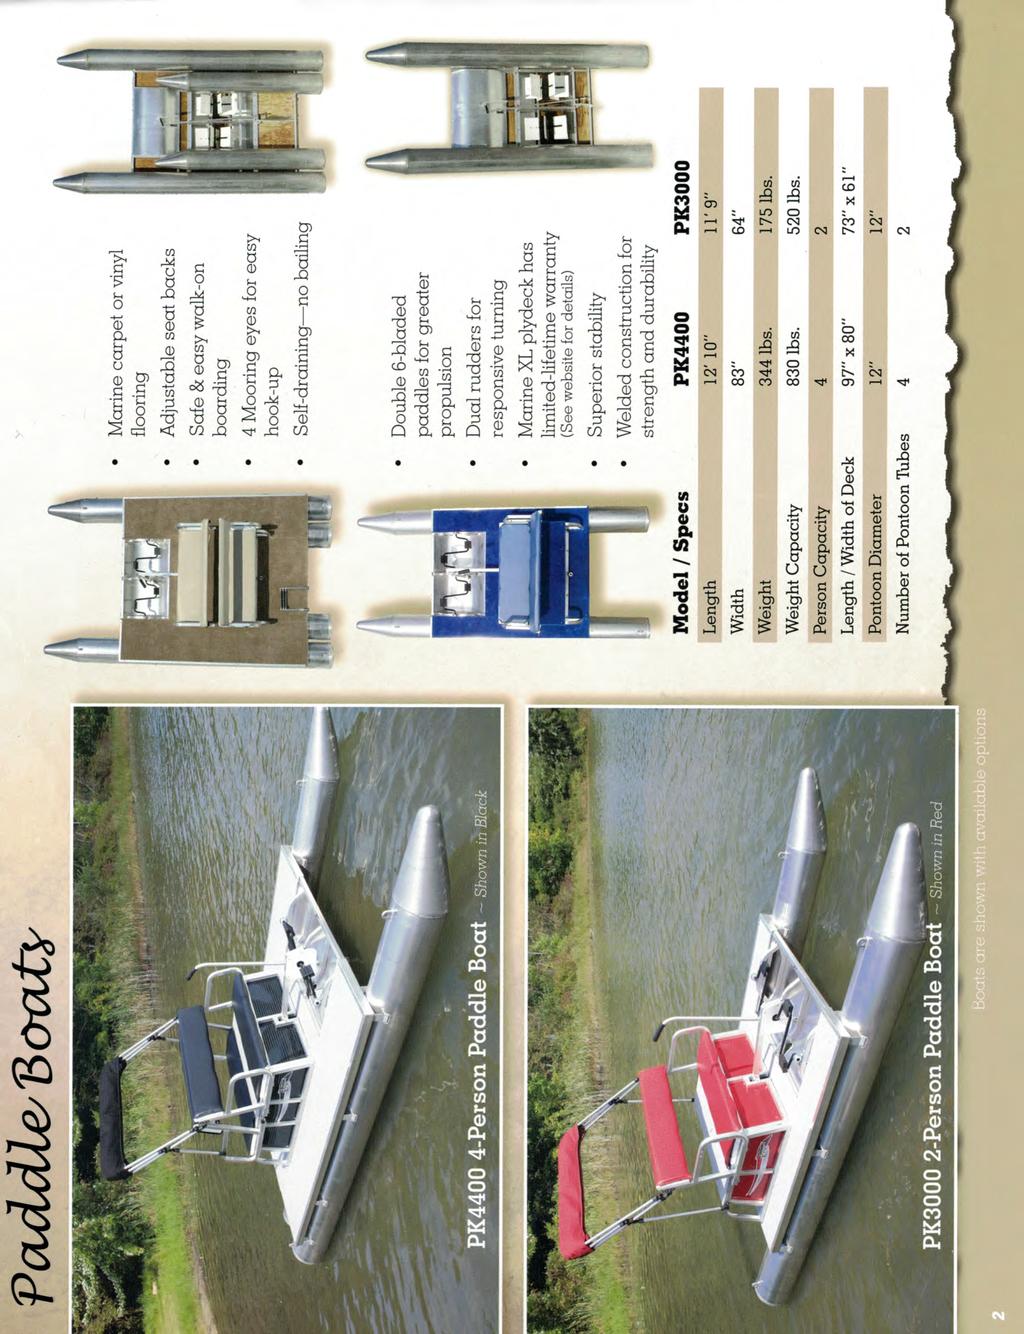 Marine carpet or vinyl flooring Adjustable seat backs Safe & easy walk-on boarding 4 Mooring eyes for easy hook-up Self-draining no bailing Double 6-bladed paddles for greater propulsion Dual rudders